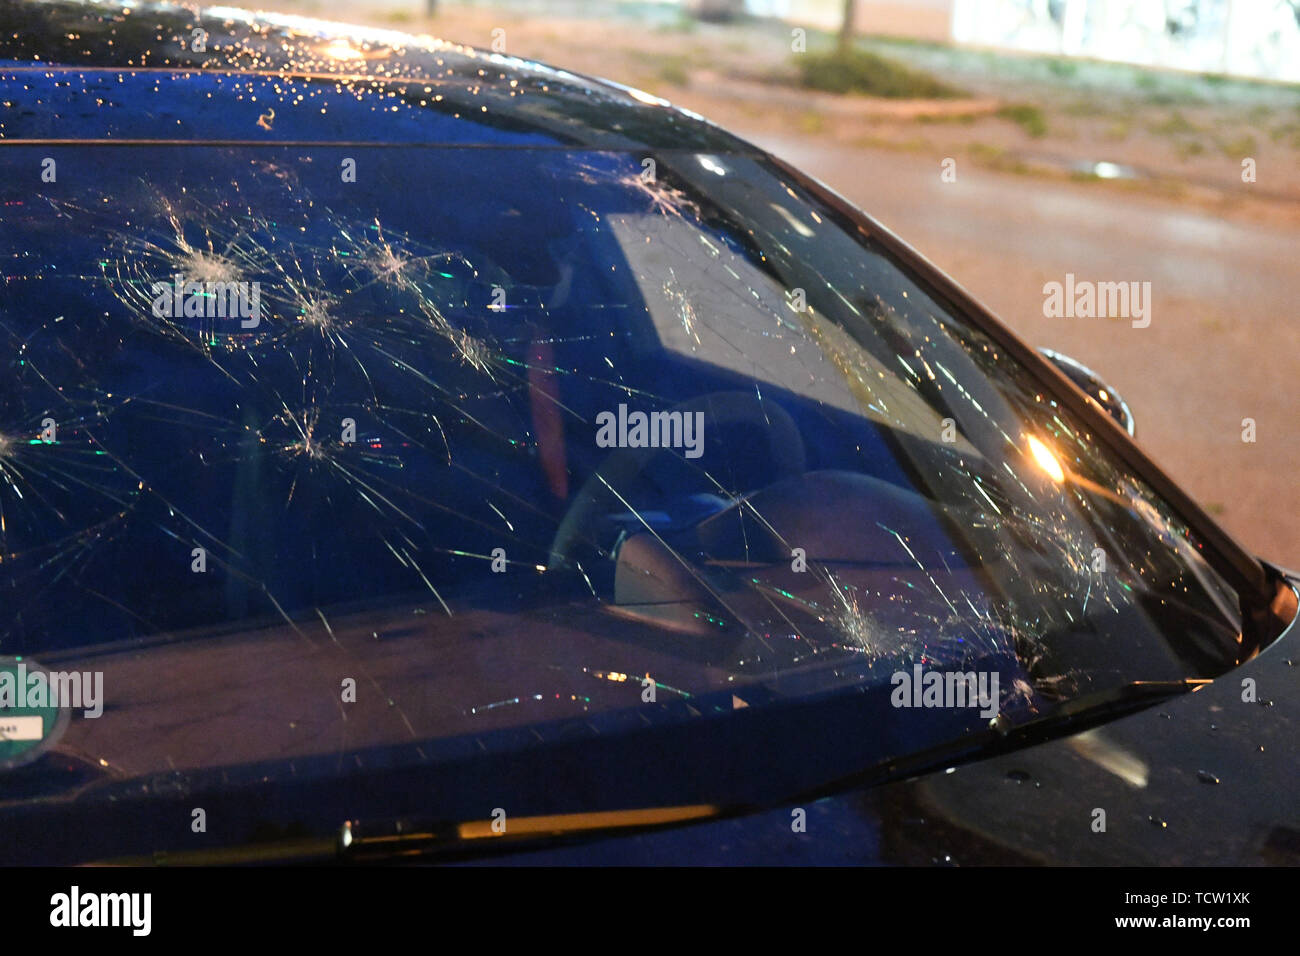 Germering, Germany. 10th June, 2019. ILLUSTRATION - A window pane of a car damaged by hail in a storm. Credit: Felix Hörhager/dpa/Alamy Live News Stock Photo